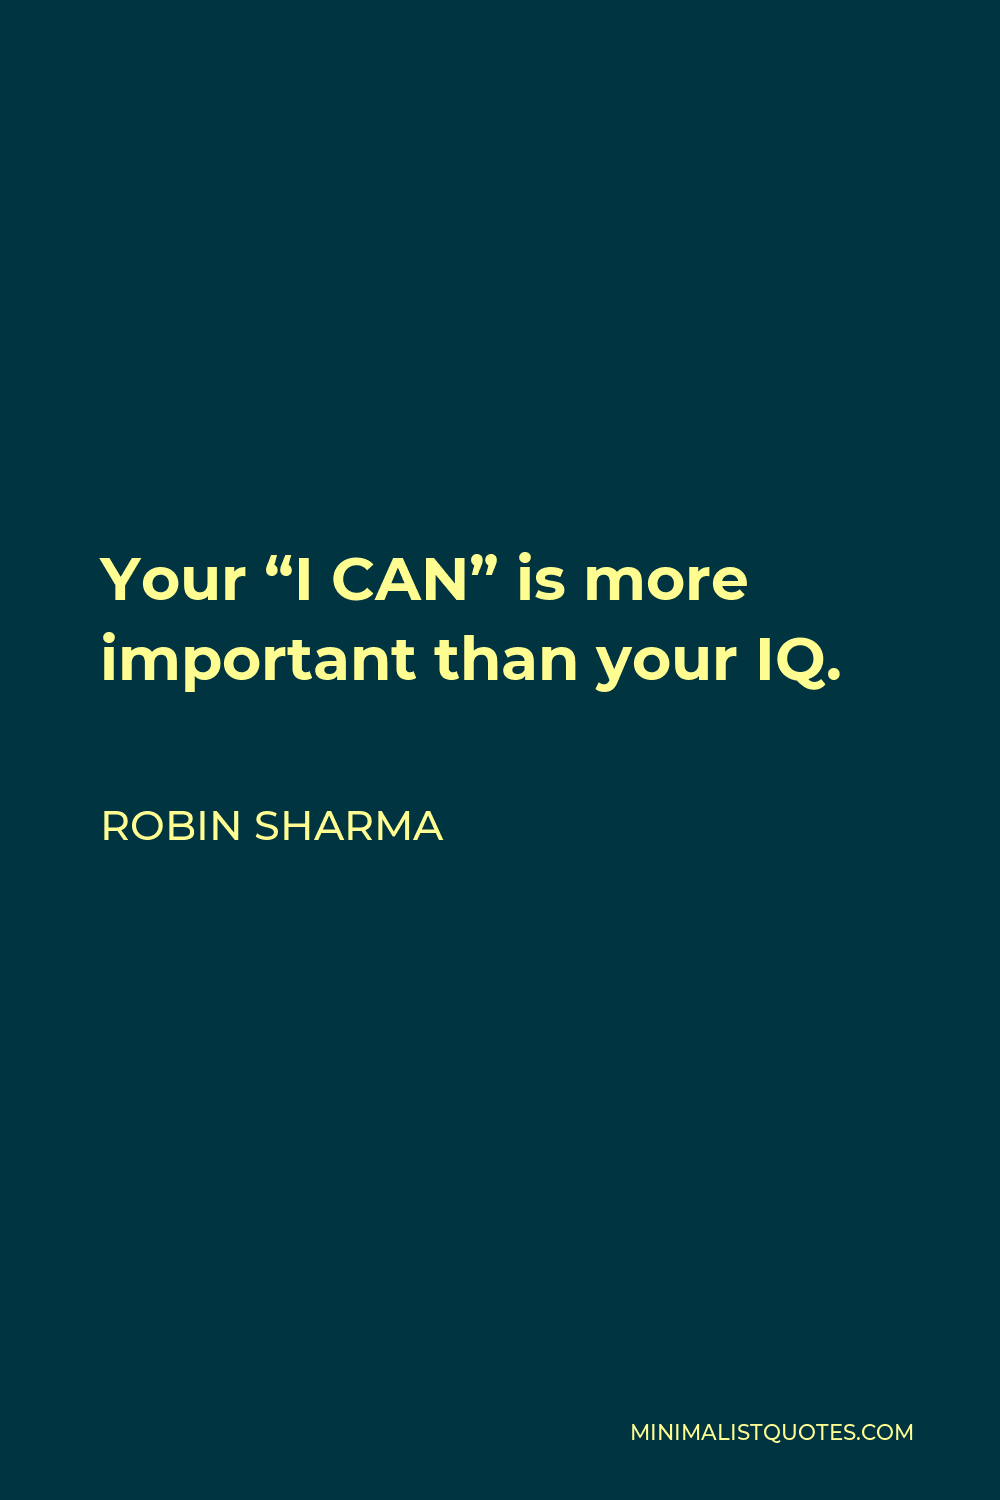 Robin Sharma Quote - Your “I CAN” is more important than your IQ.